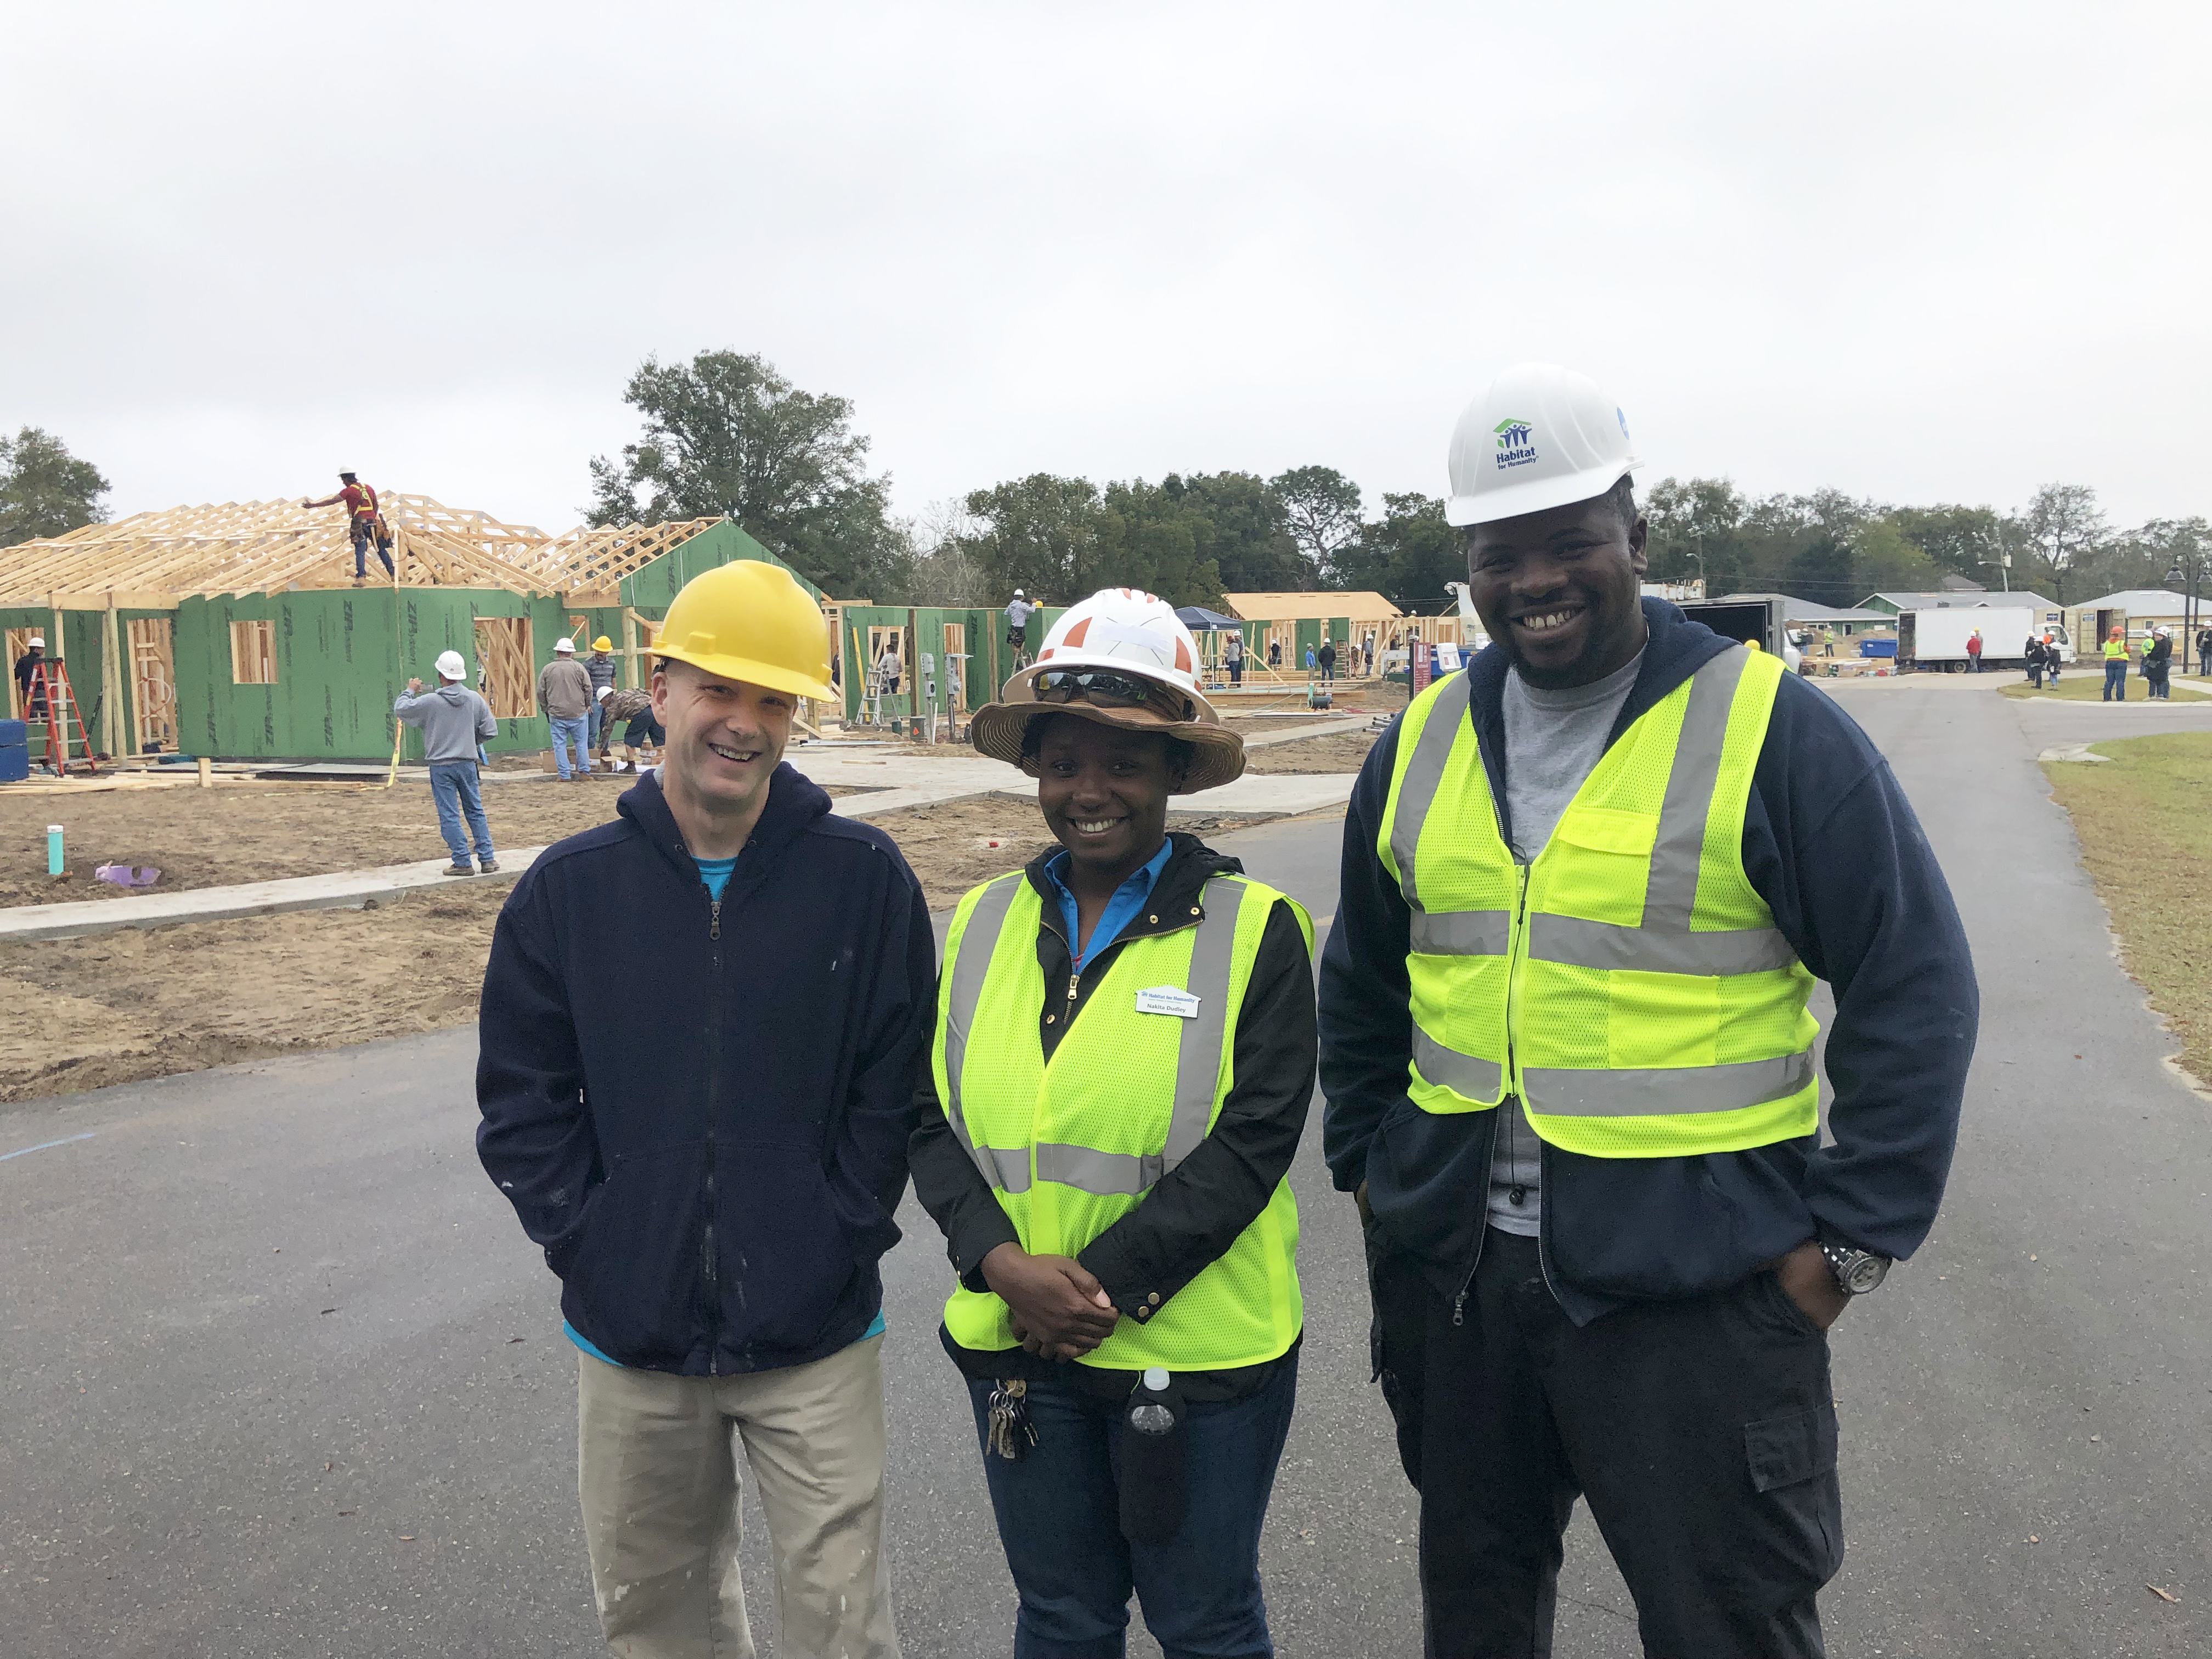 Three Habitat for Humanity employees wearing vests and hard hats pose for a photo. In the background, homes are actively being built.